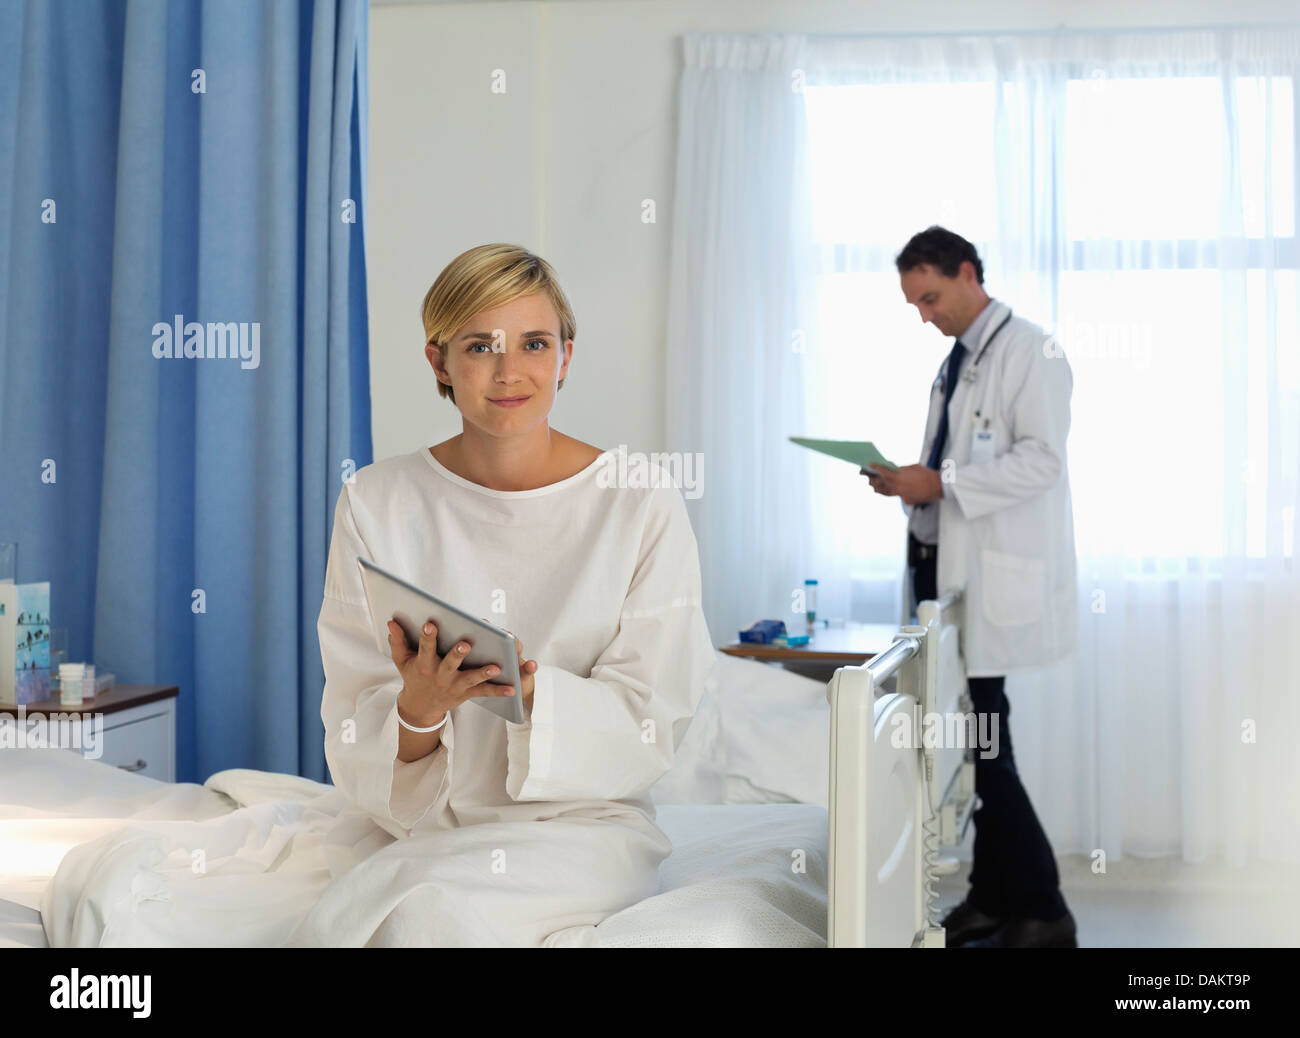 Patient using tablet computer in hospital room Stock Photo